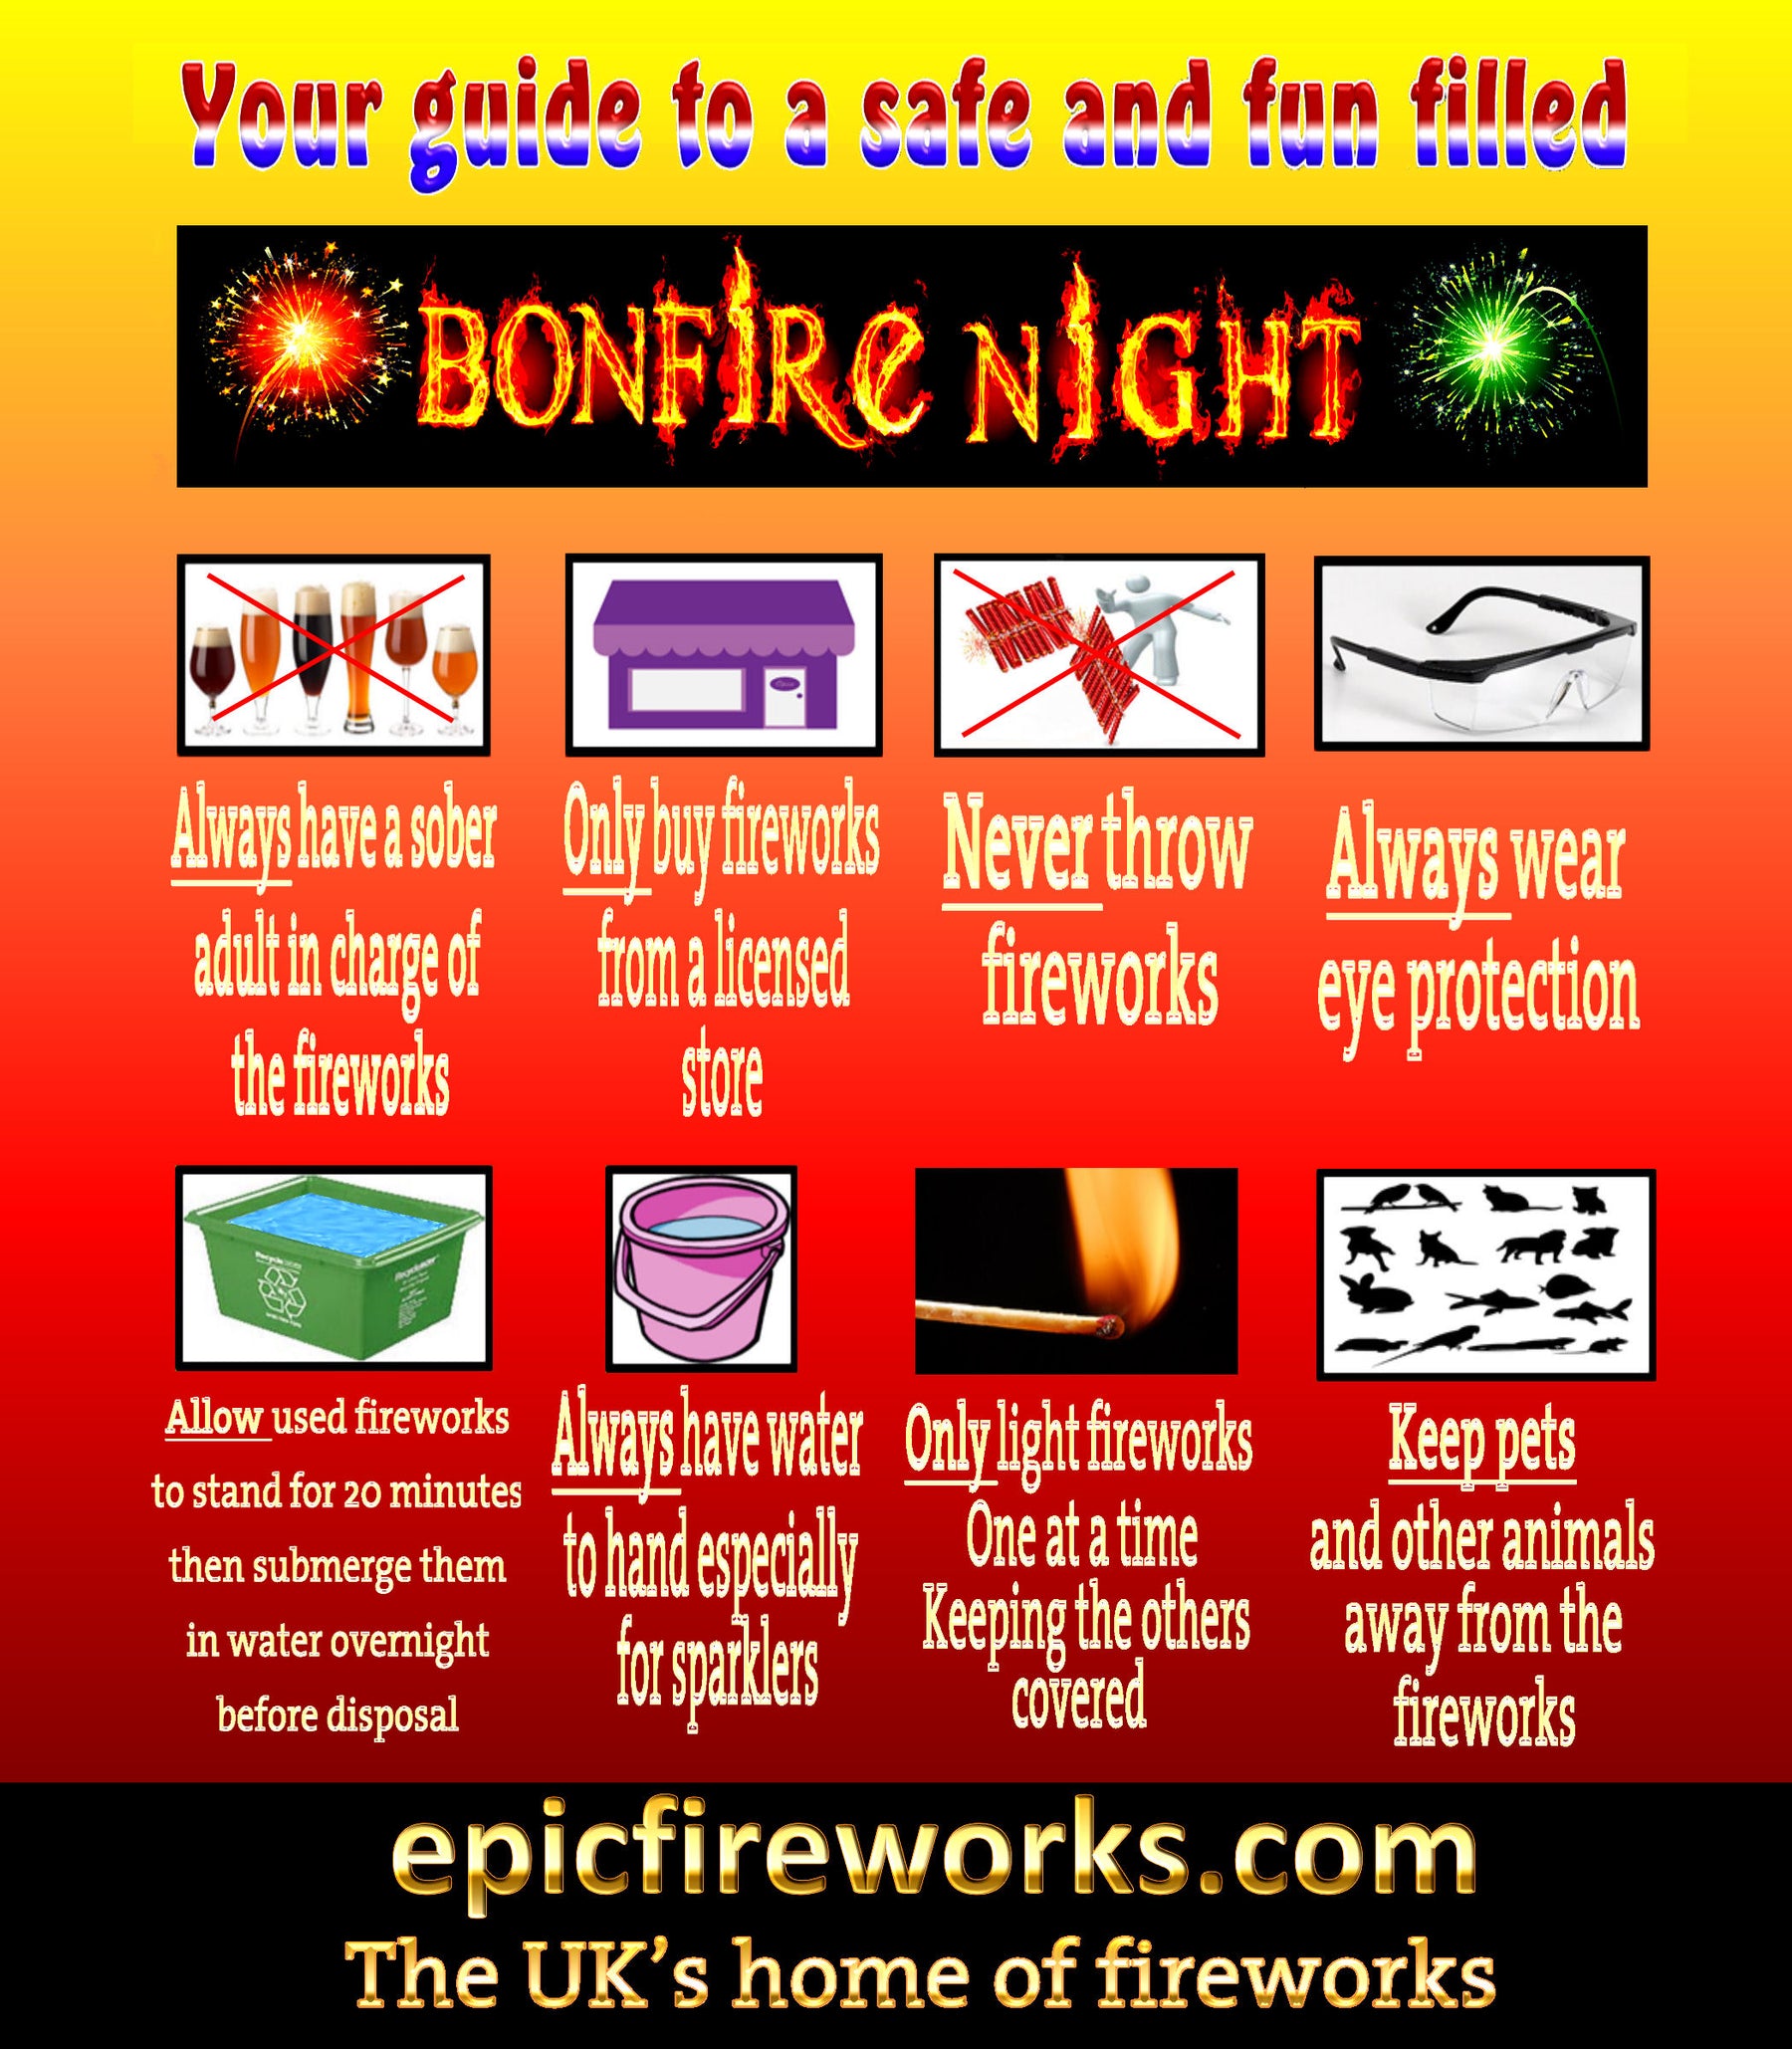 Please respect fireworks - fireworks and bonfires ruin lives in a flash